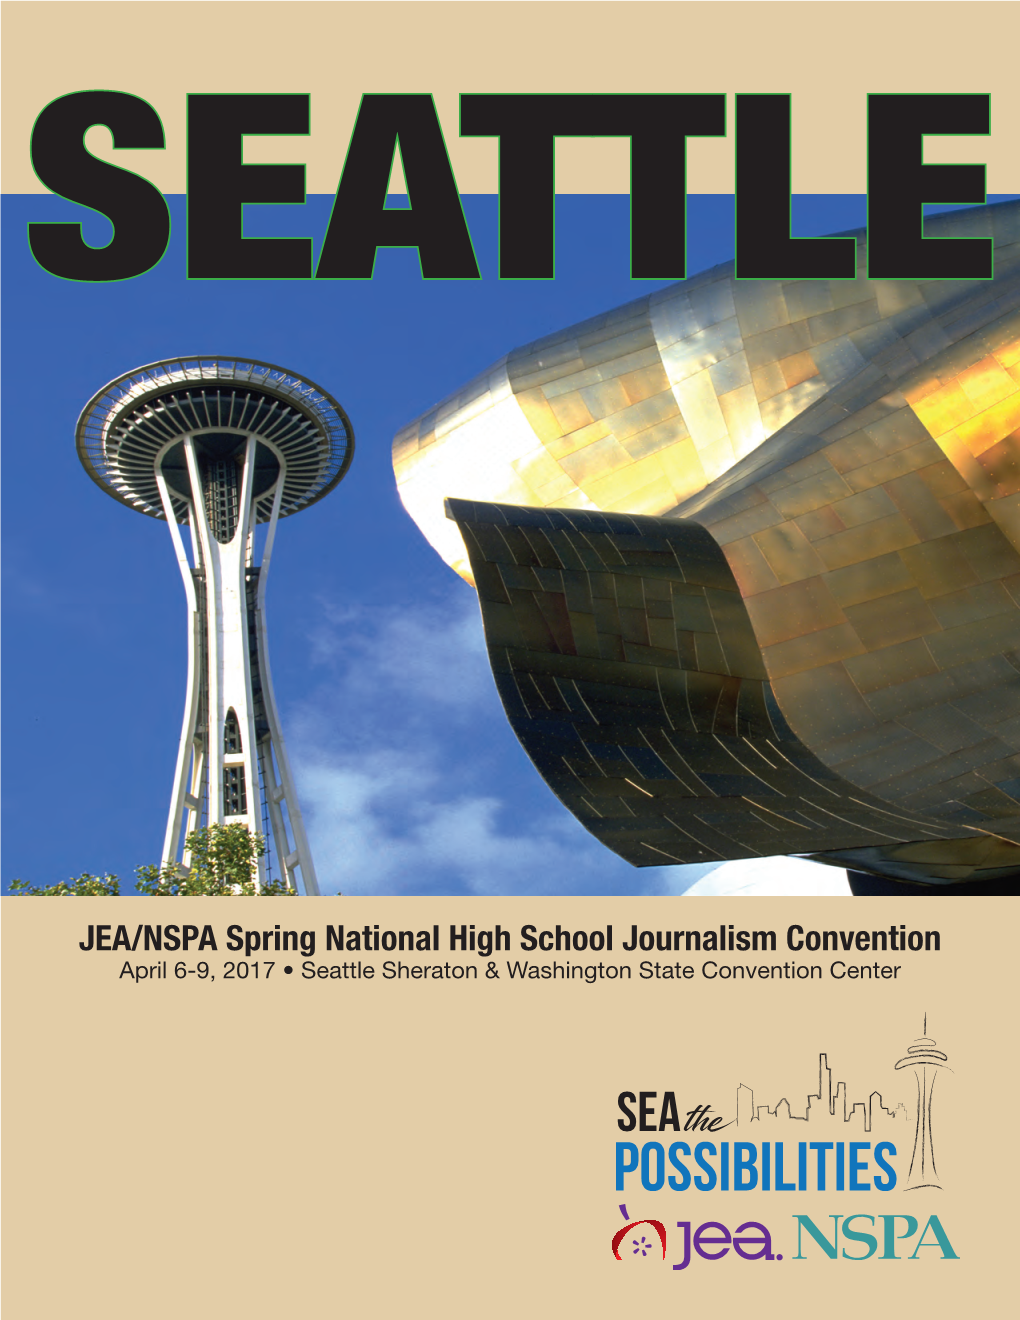 JEA/NSPA Spring National High School Journalism Convention